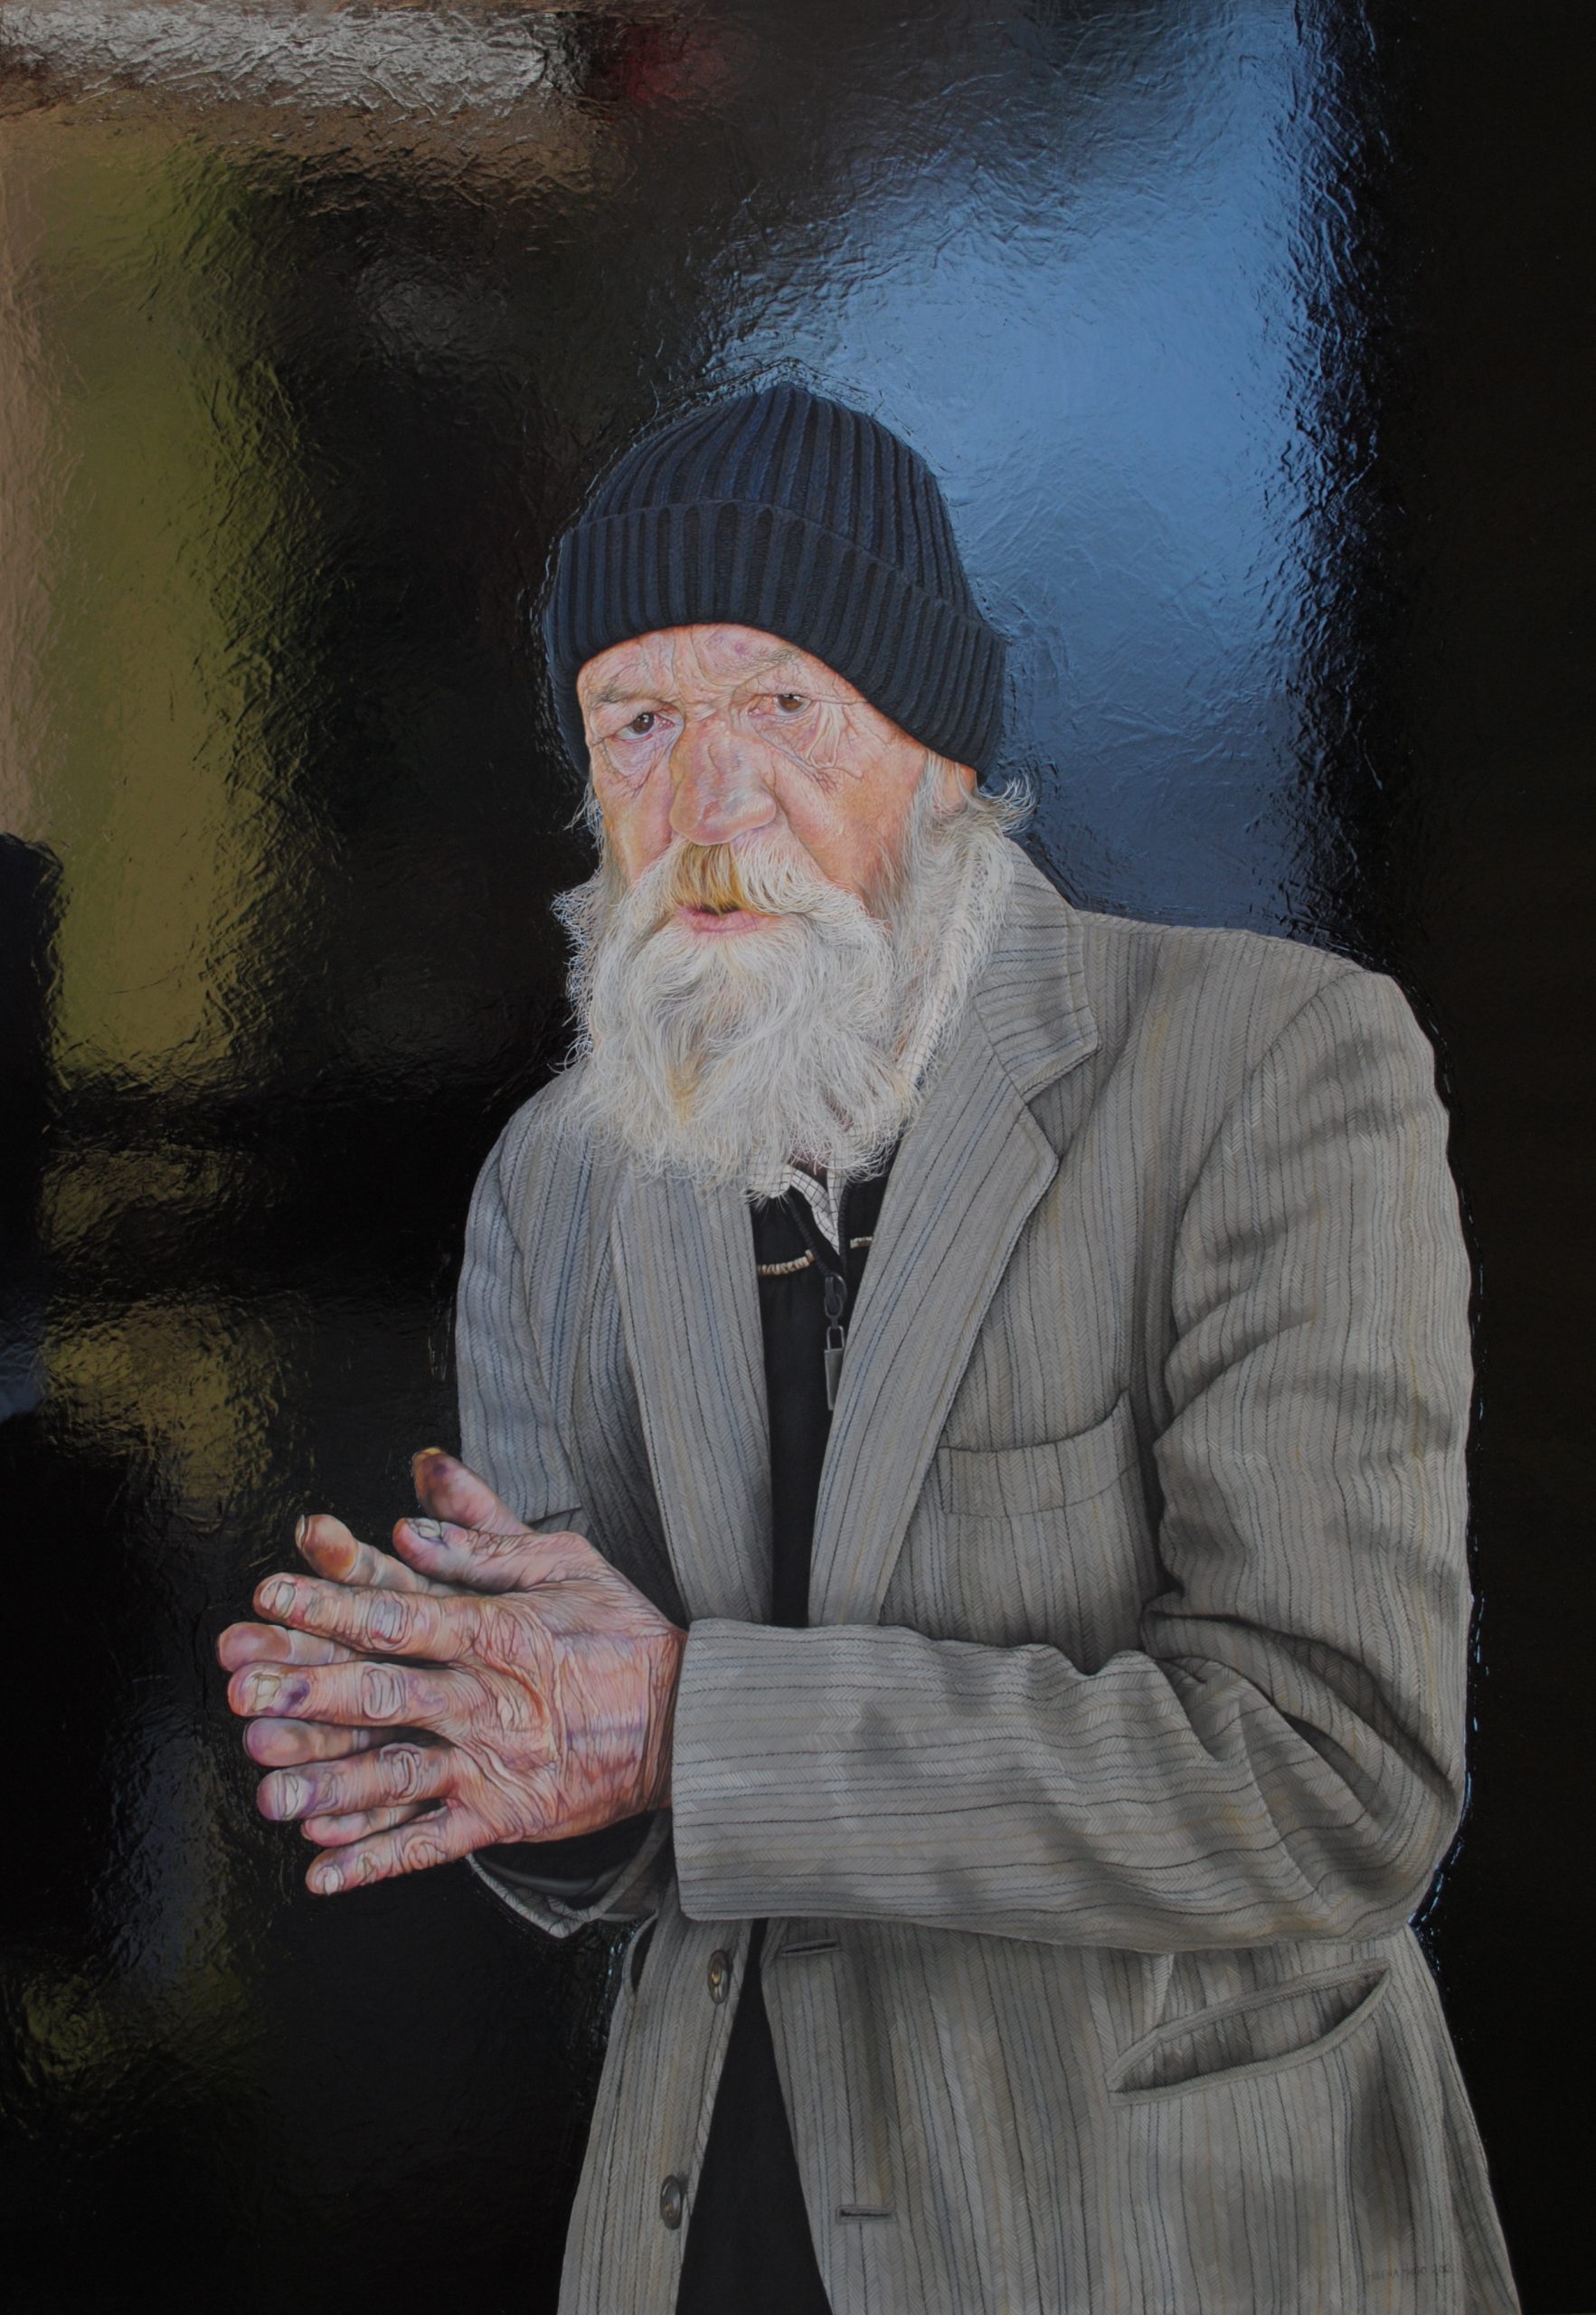 The Hungry Philosopher

140cm x 100cm

Pastel and enamel on board